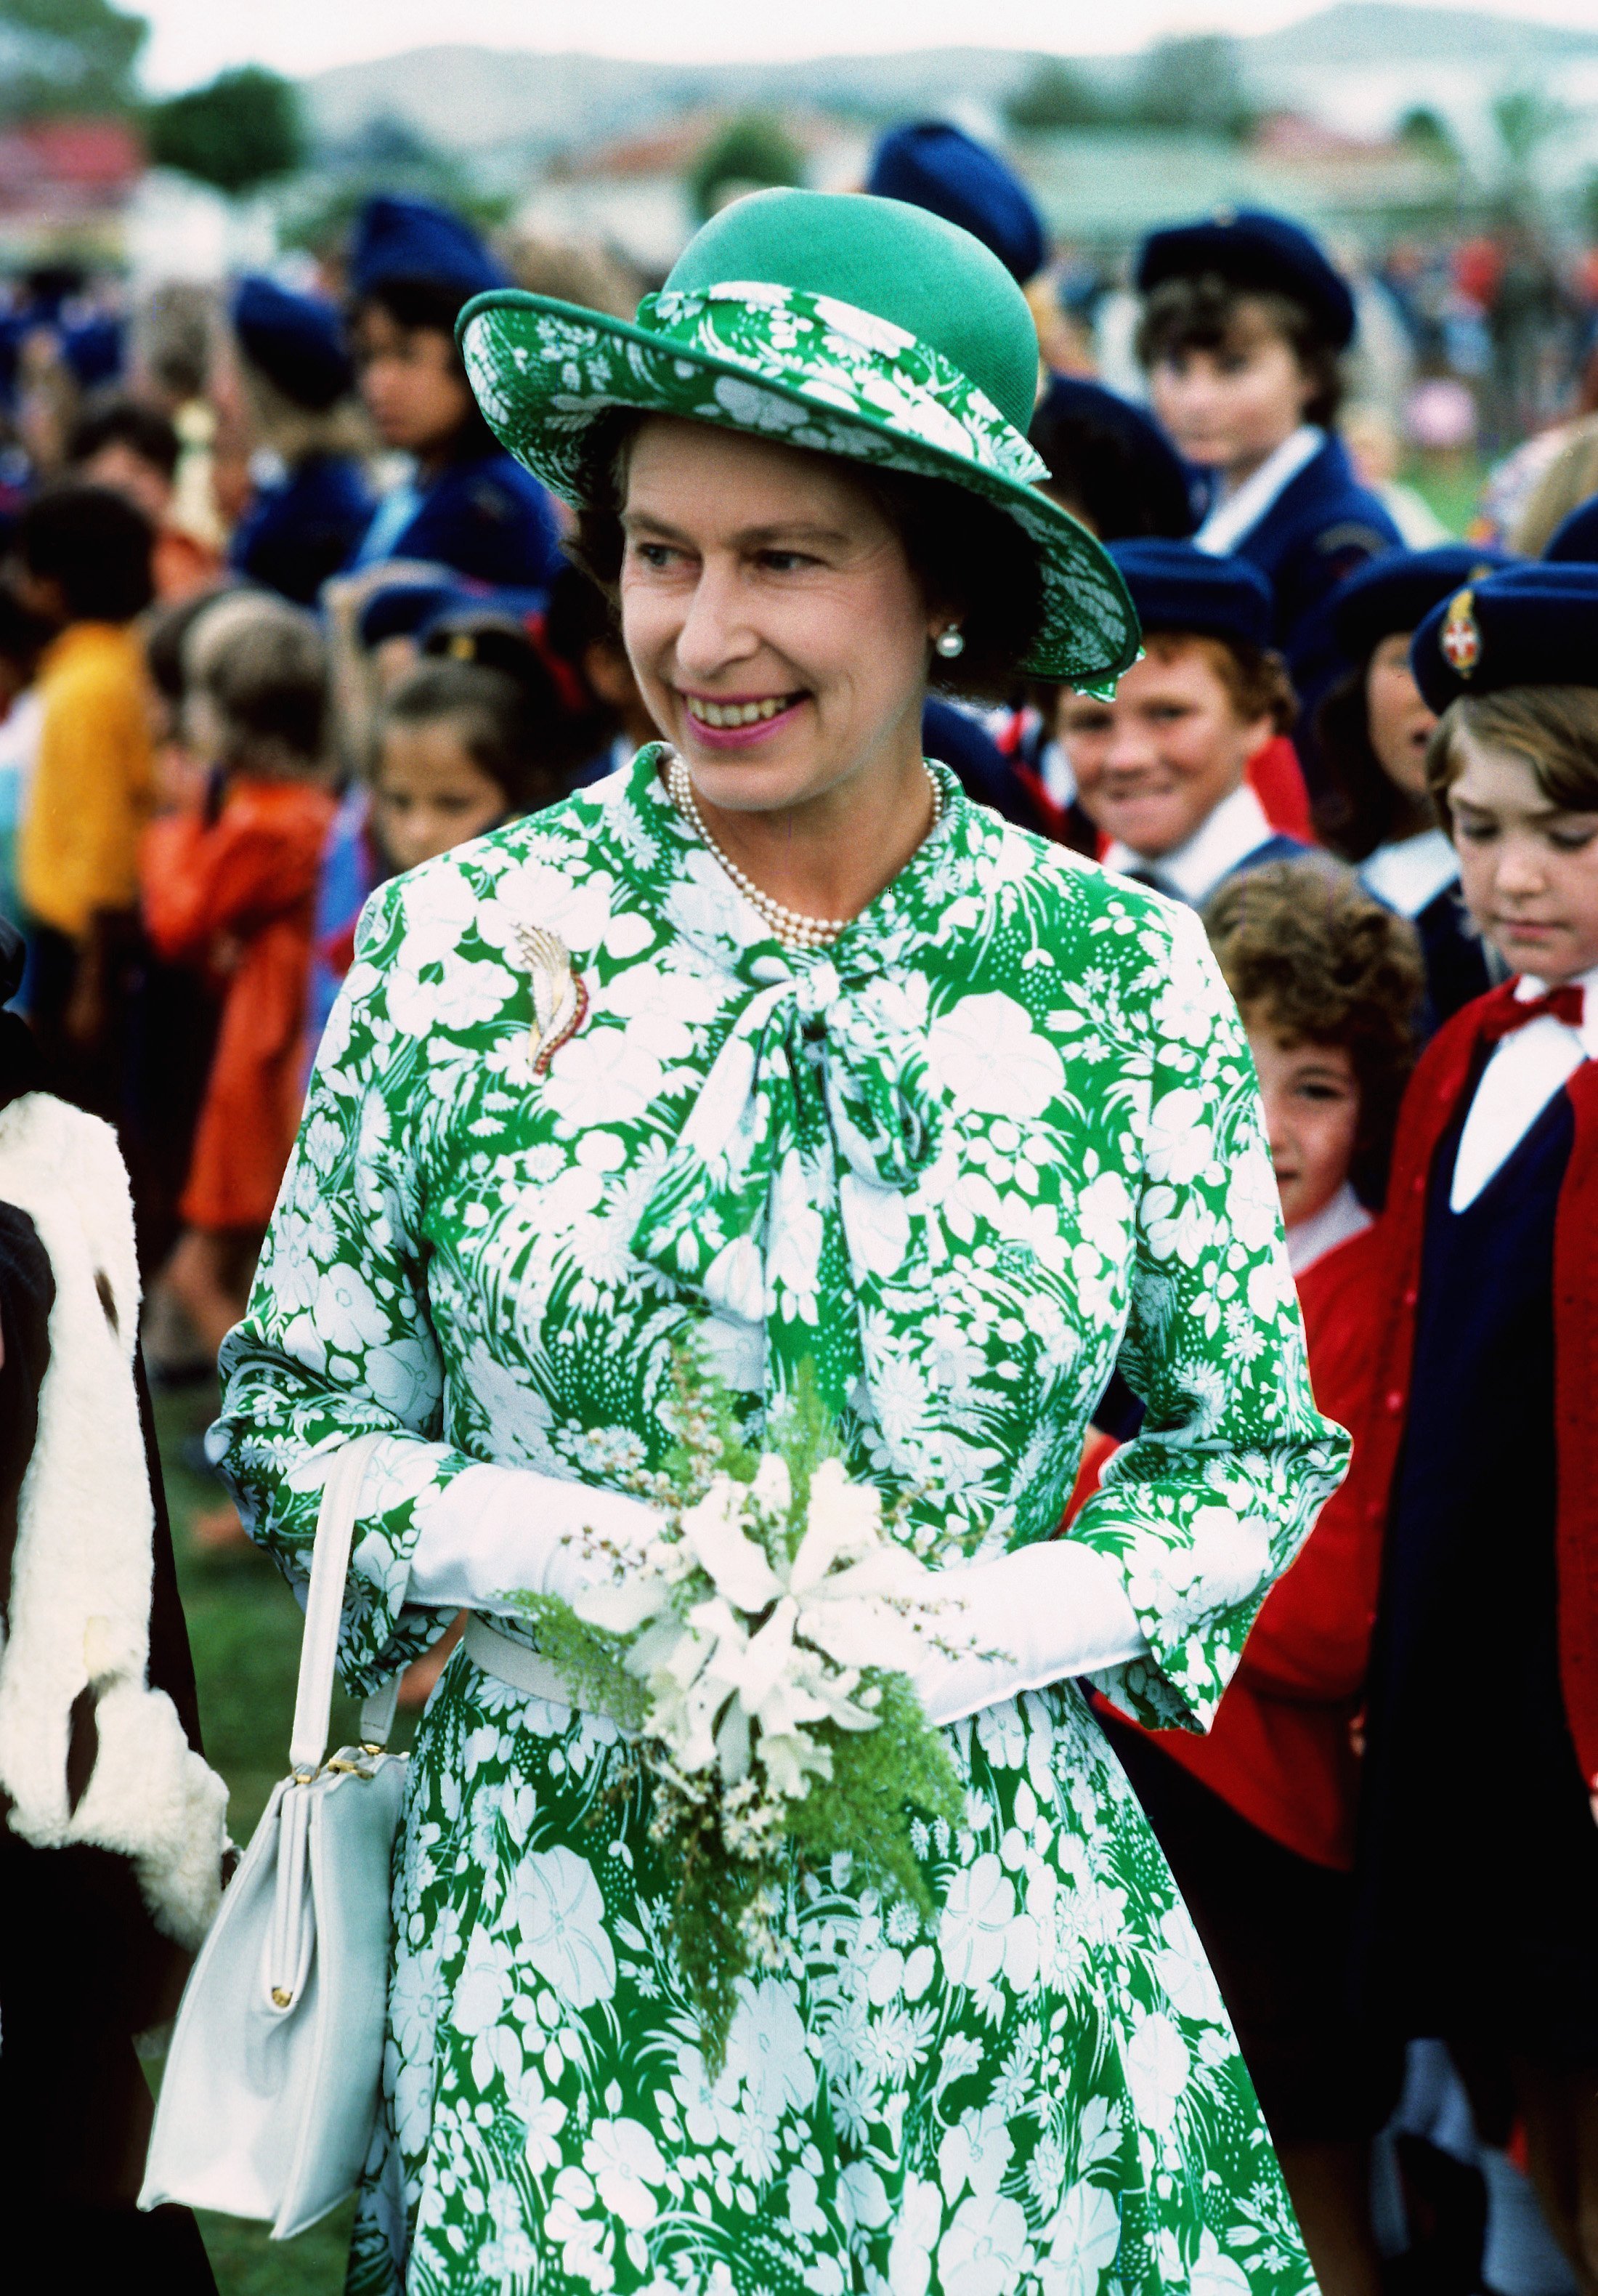 Queen Elizabeth ll smiles during her visit to New Zealand part of her Silver Jubilee Year Tour in March of 1977. | Source: Getty Images